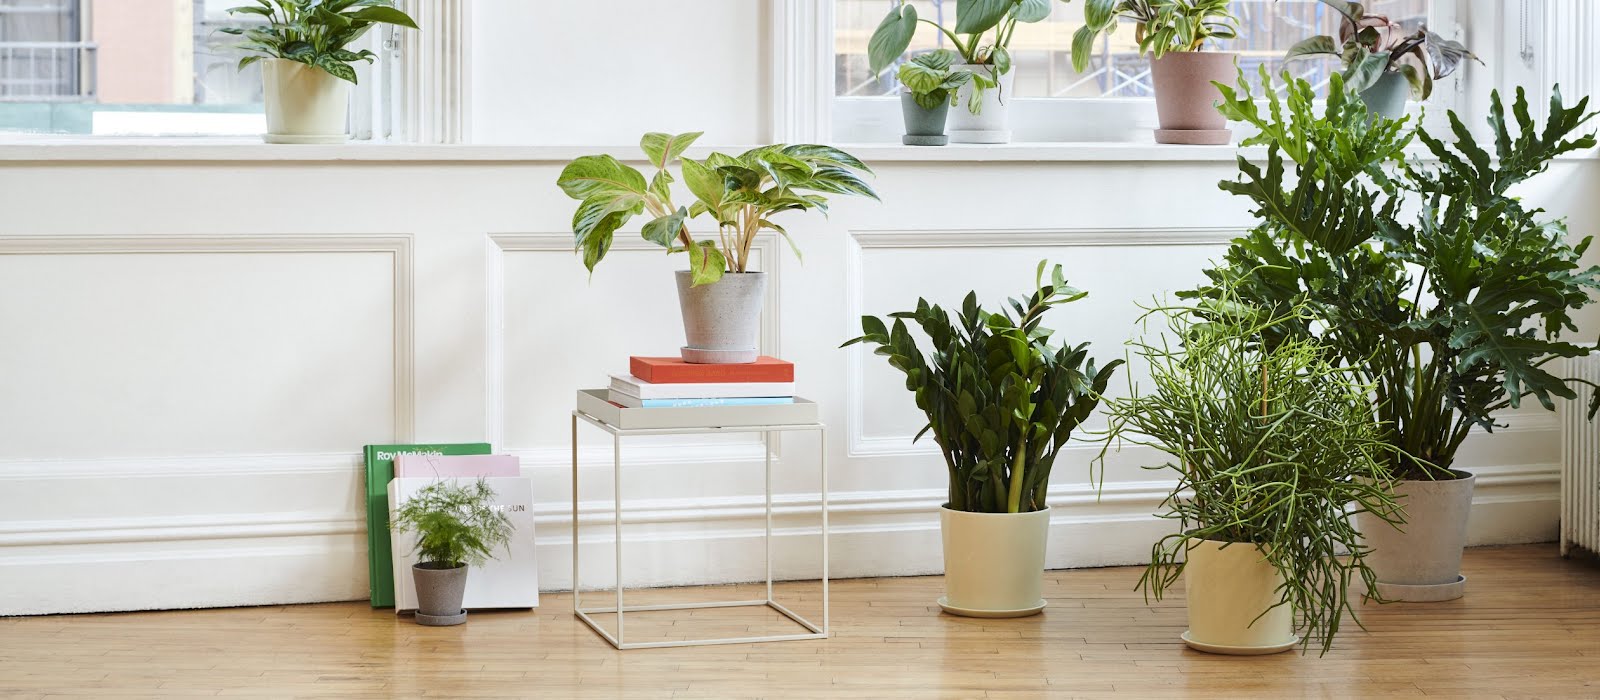 These gorgeous pots will zhuzh up even a slightly sad houseplant